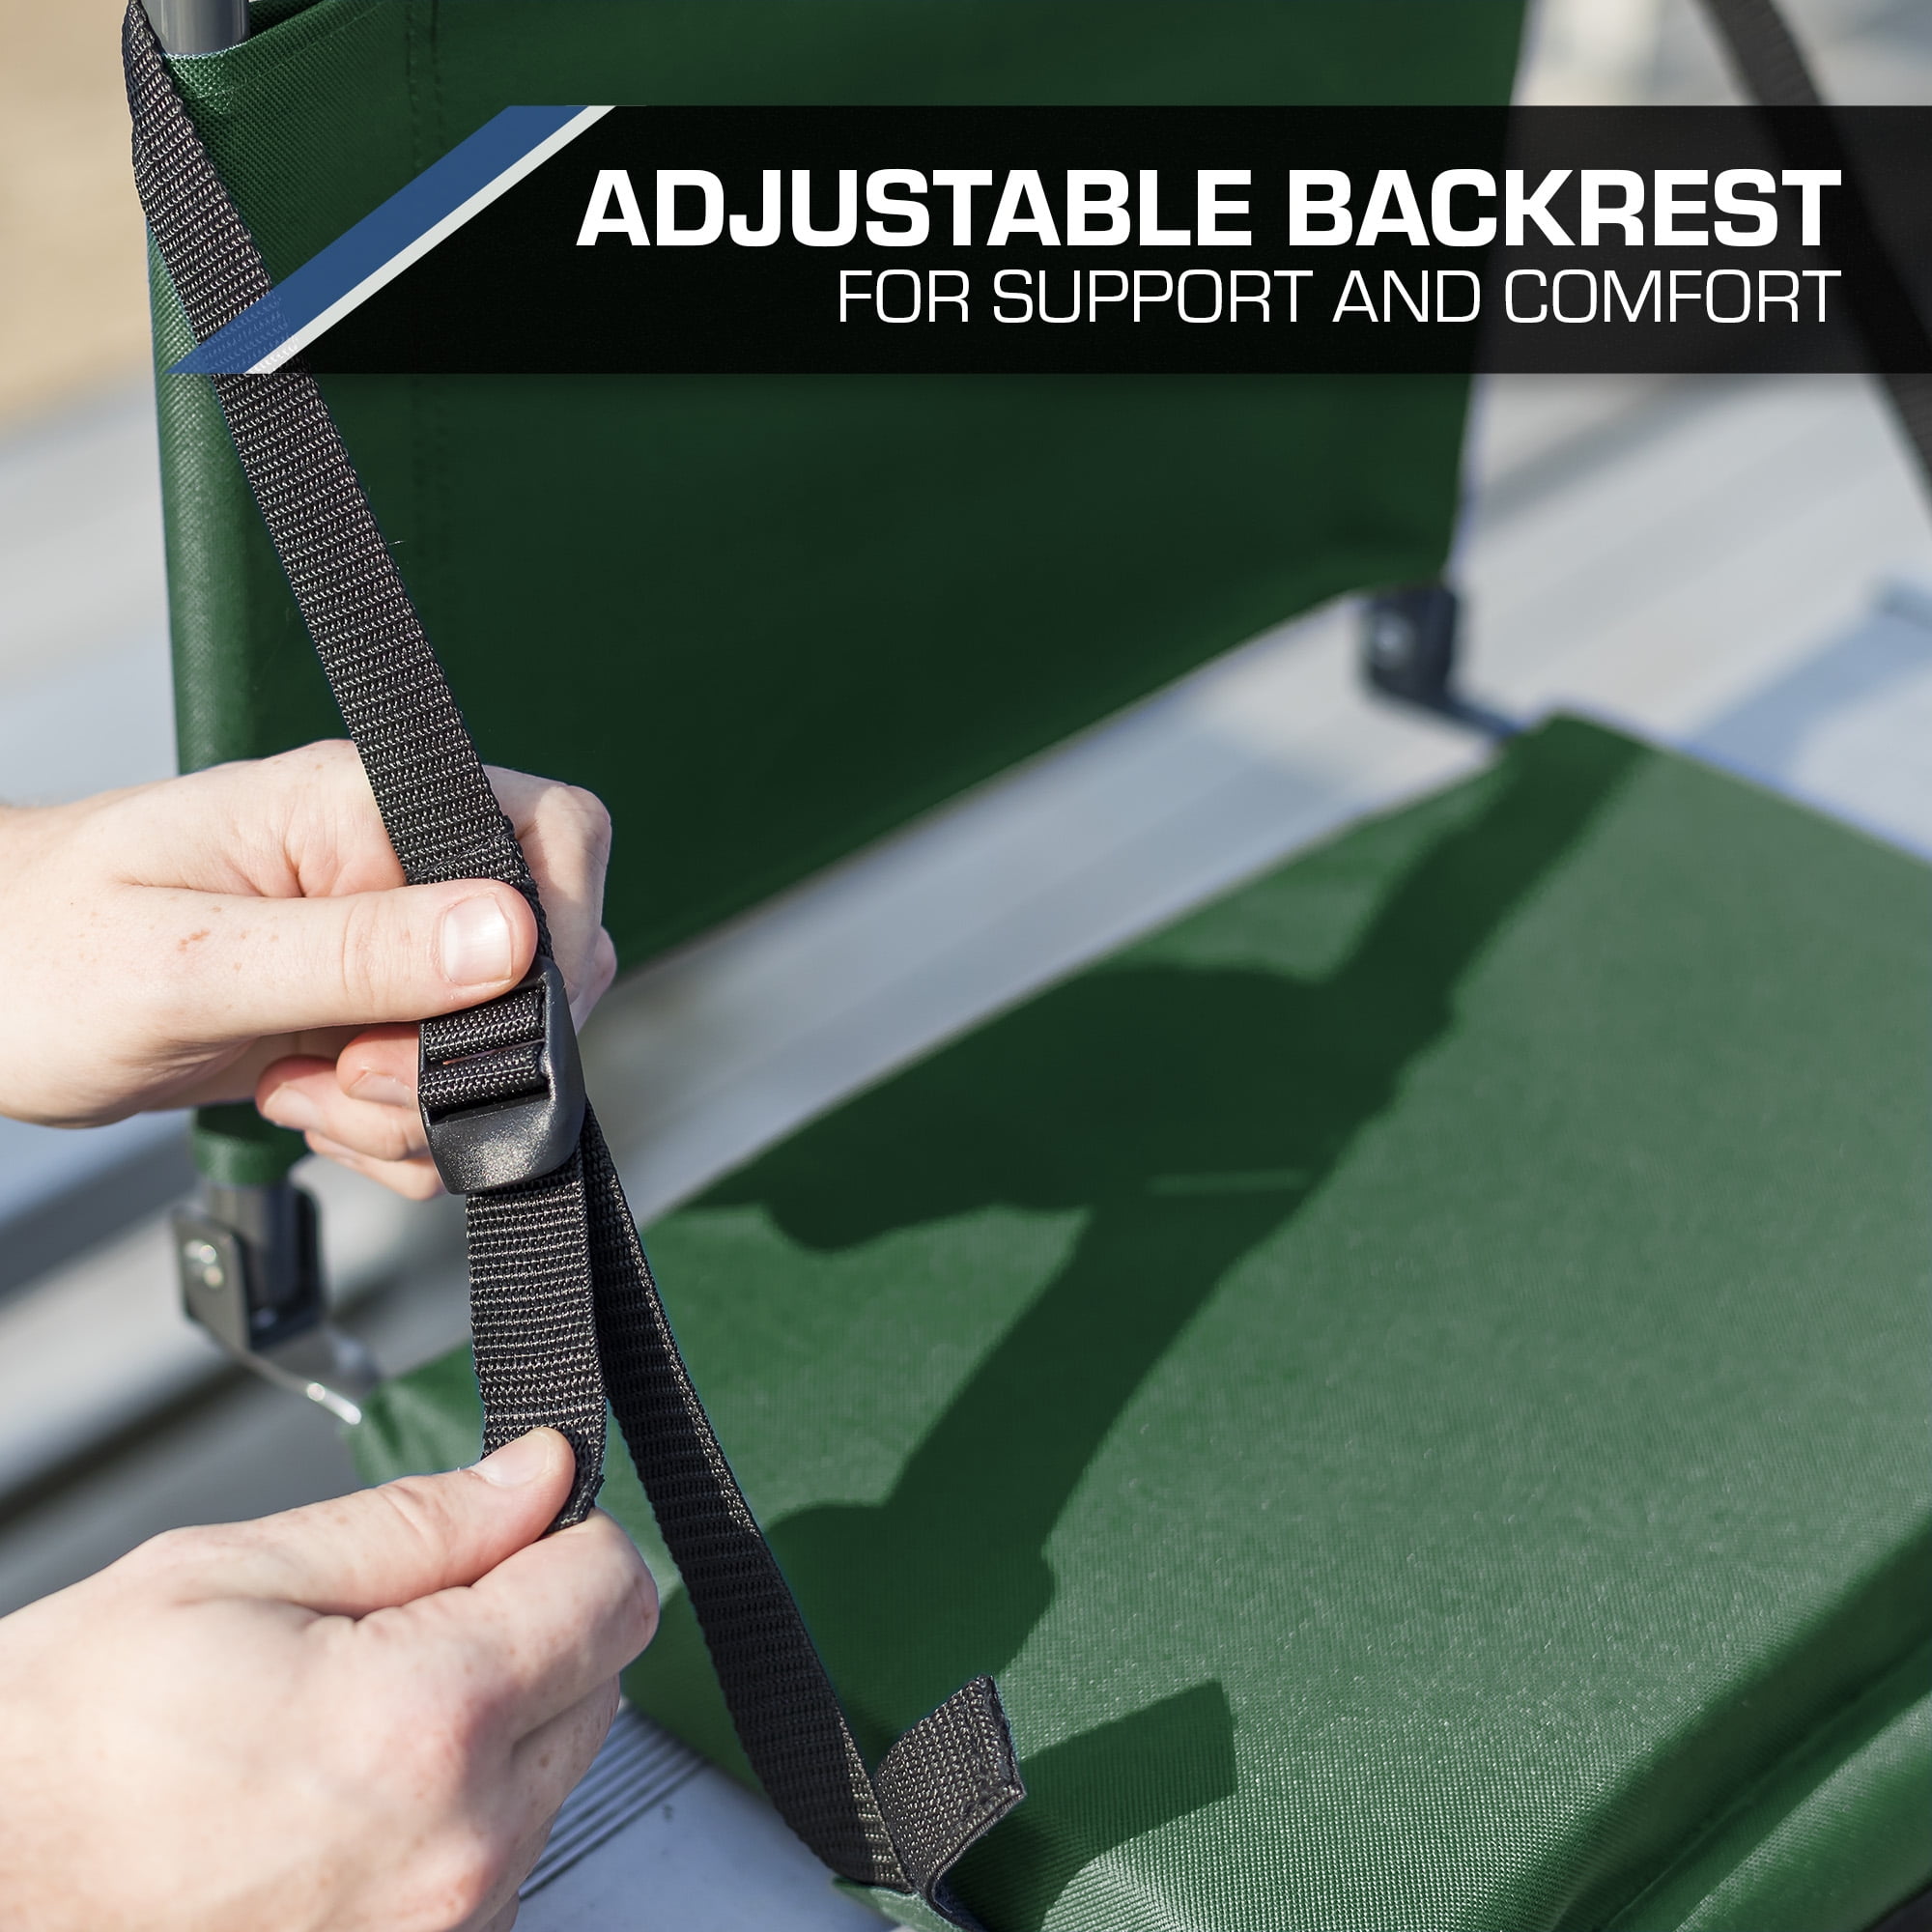 BACK ONLY - Replacement Stadium Seat Back - Regular 17 inch